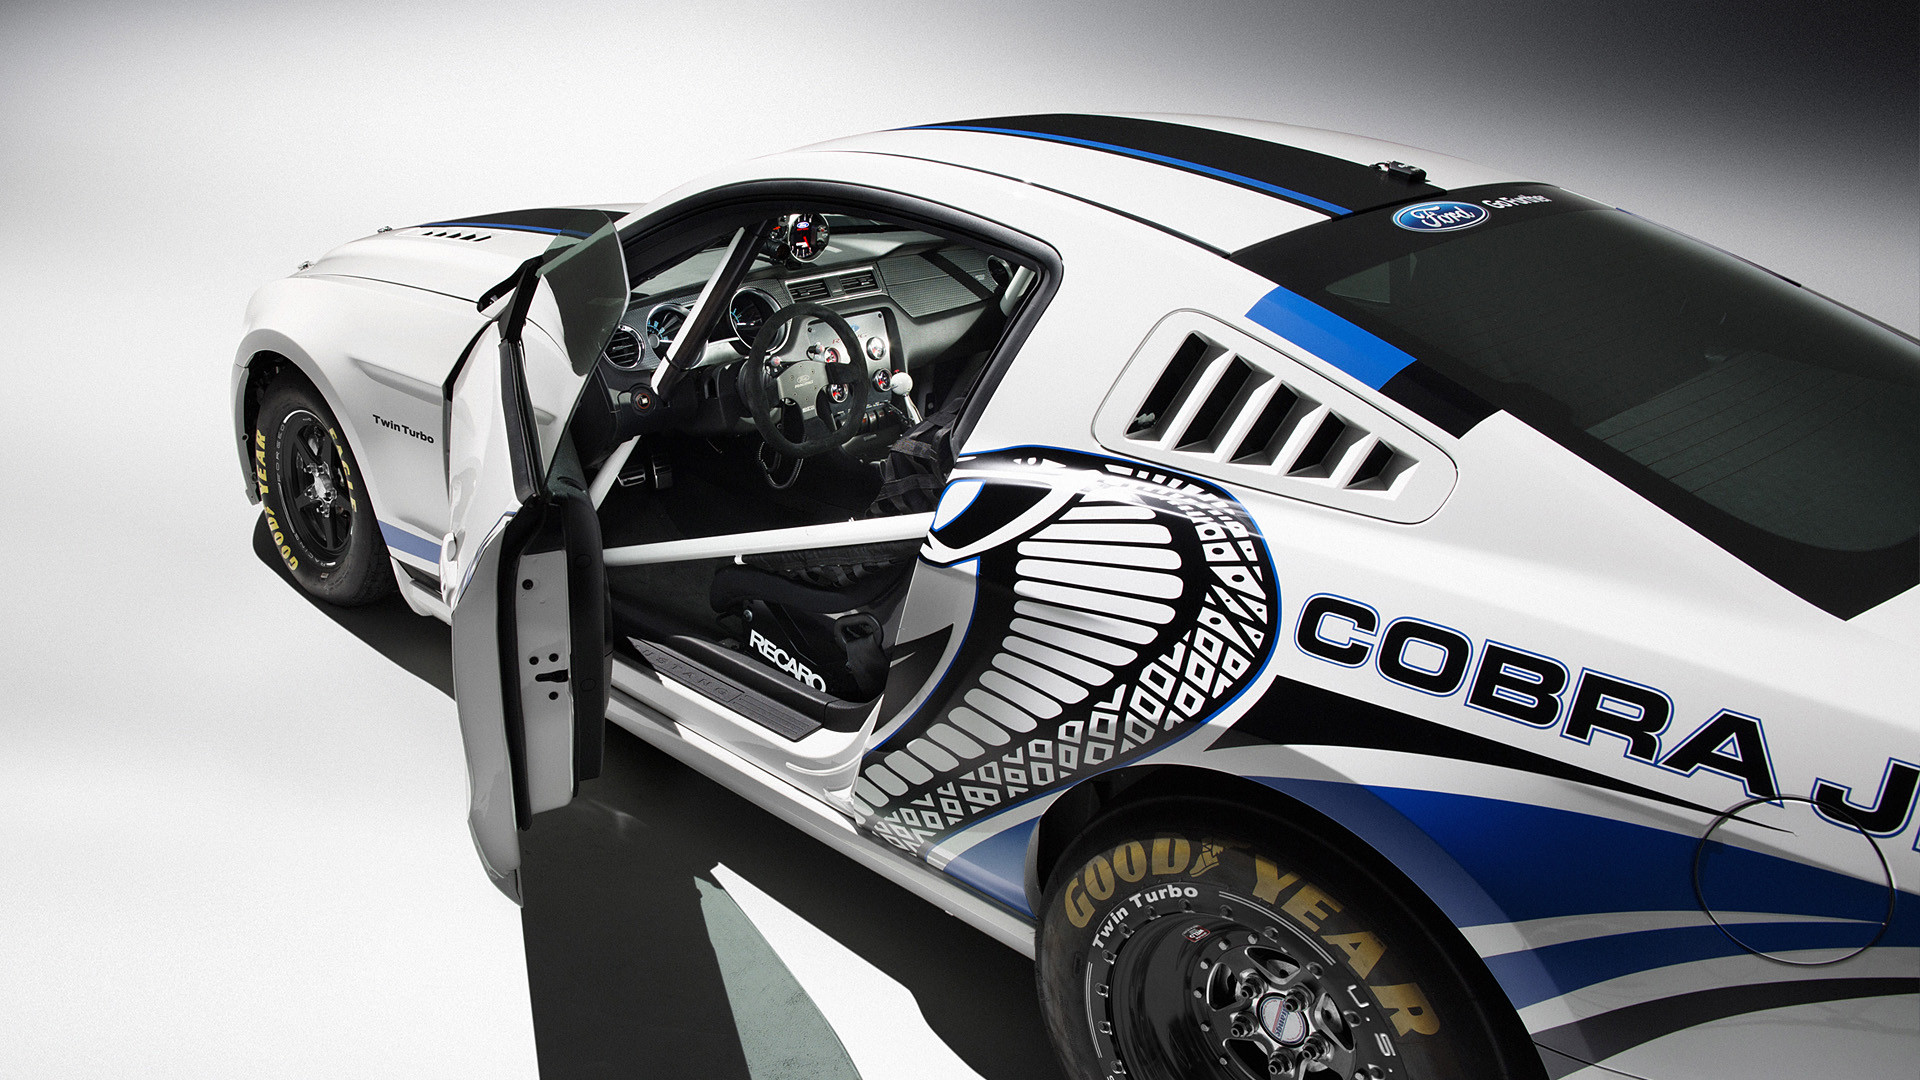 1920x1080 2012 Ford Mustang Cobra Jet Twin Turbo Concept picture